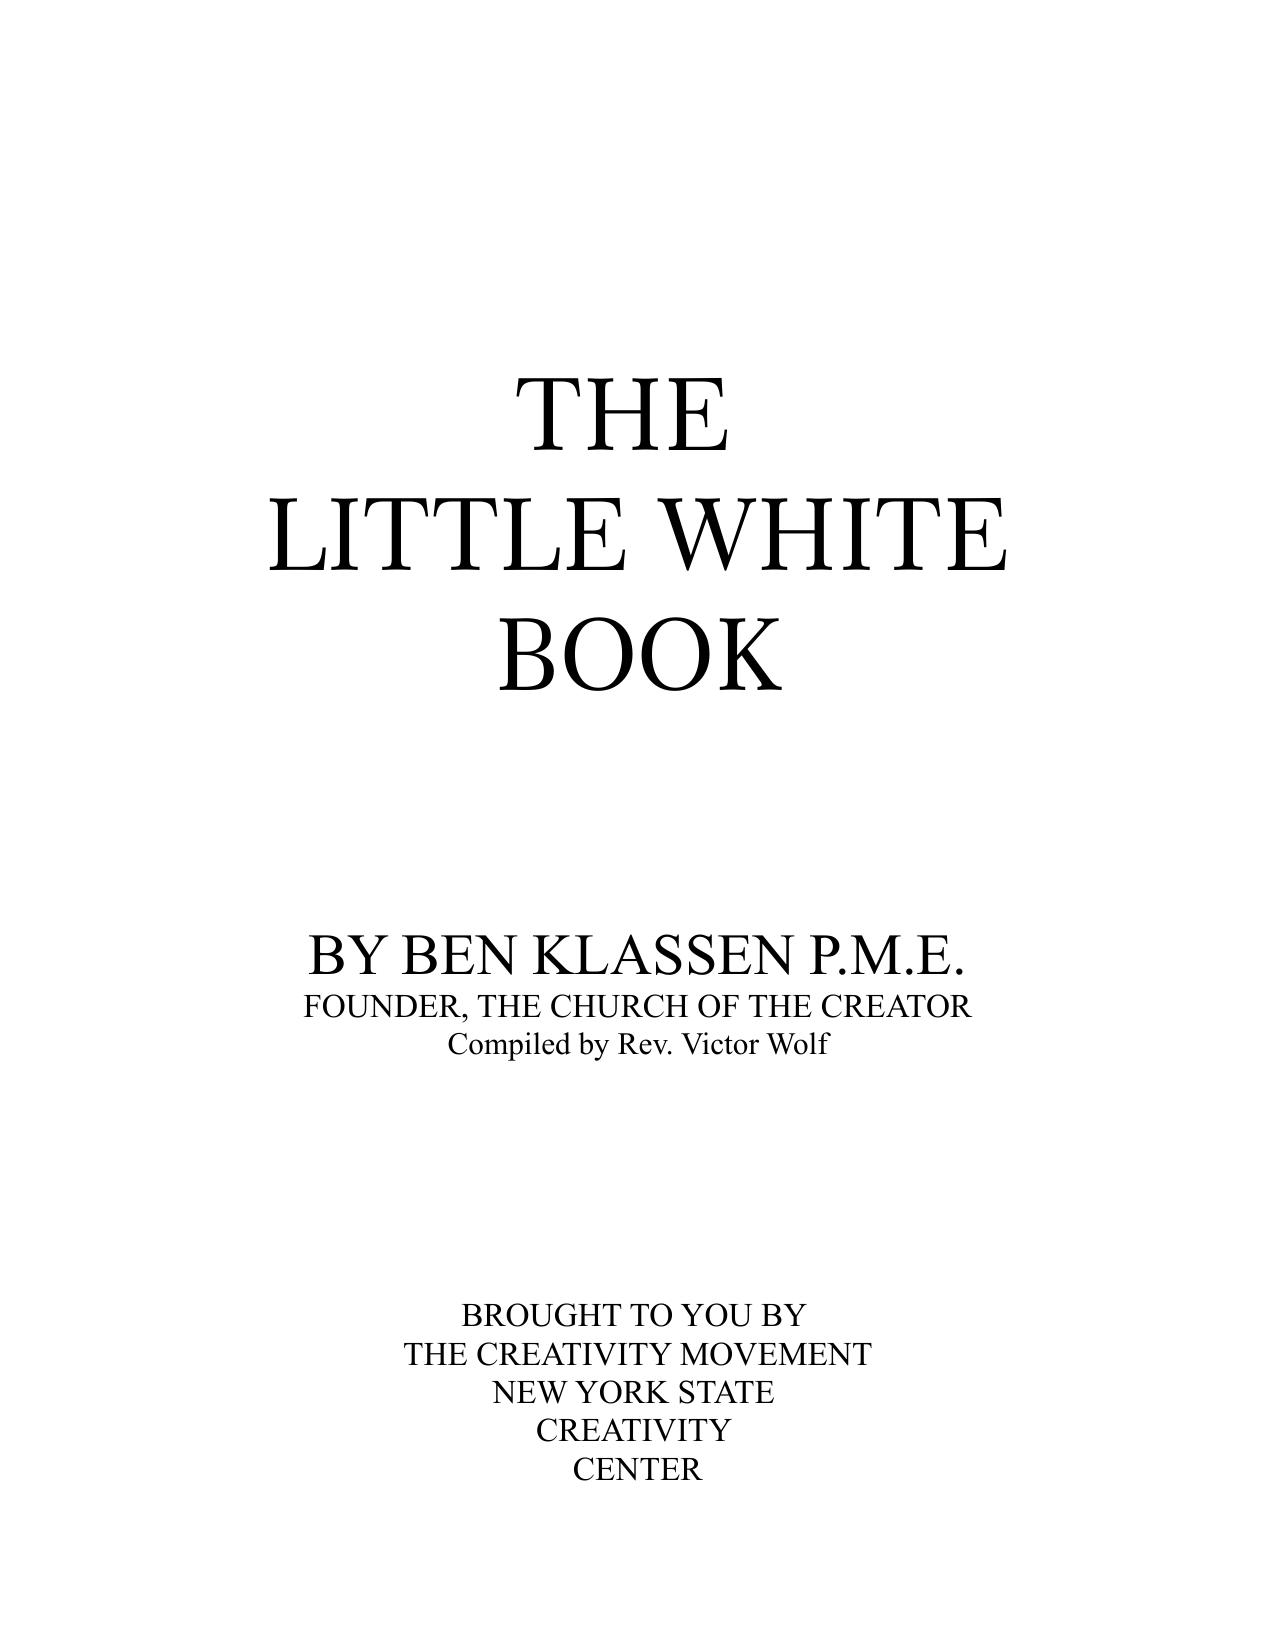 THE LITTLE WHITE BOOK by Unknown